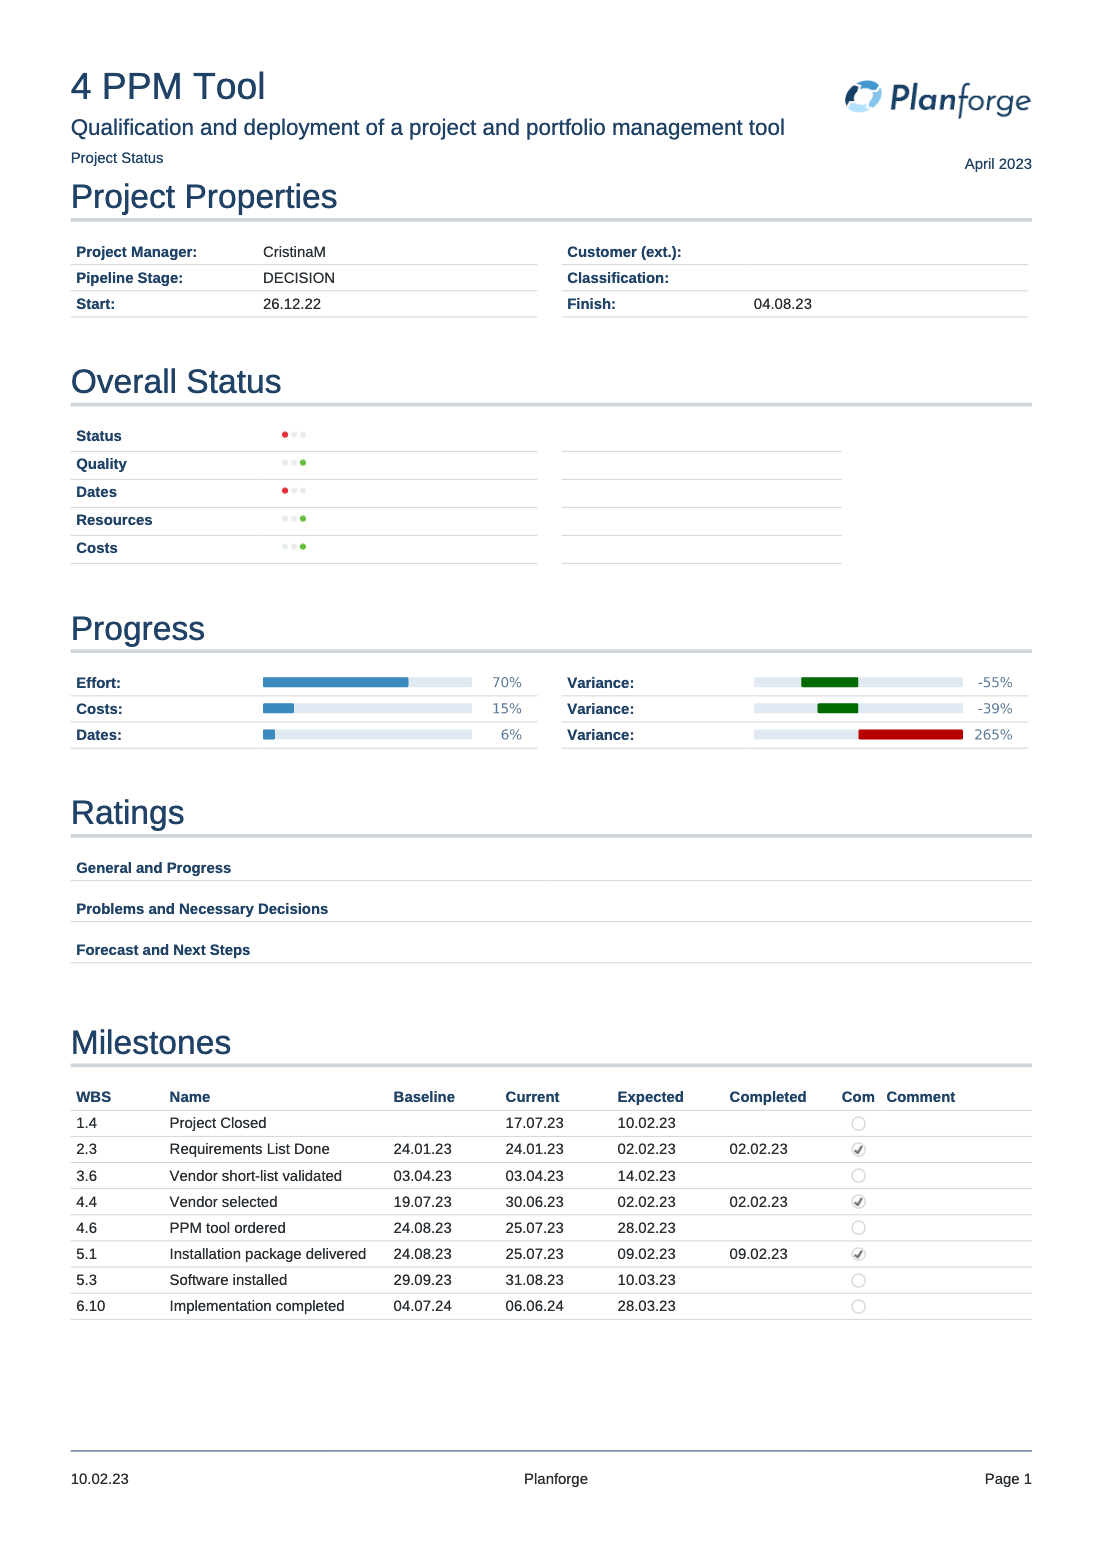 Planforge Software - Project status reporting made easy